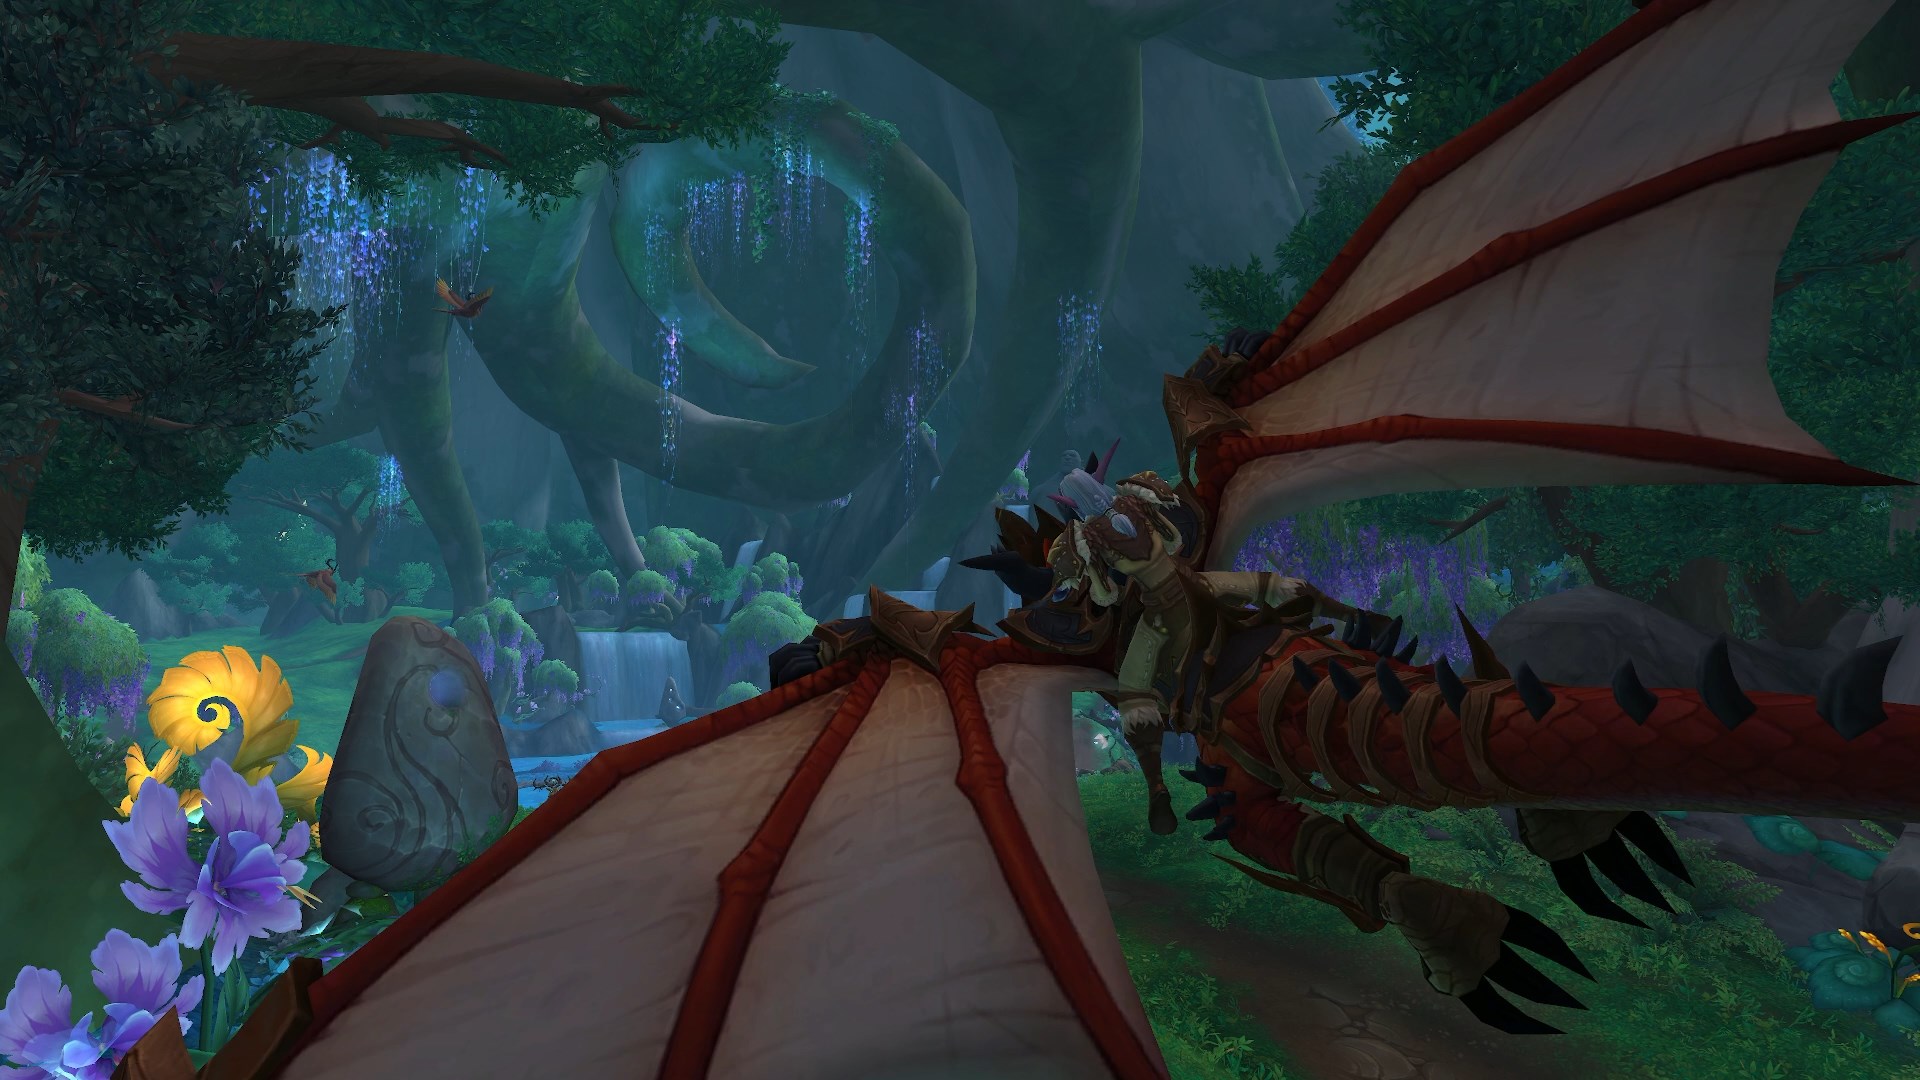 A player in World of Warcraft flies their dragon over the sights of the Emerald Dream in the Dragonflight patch Guardians of the Dream.